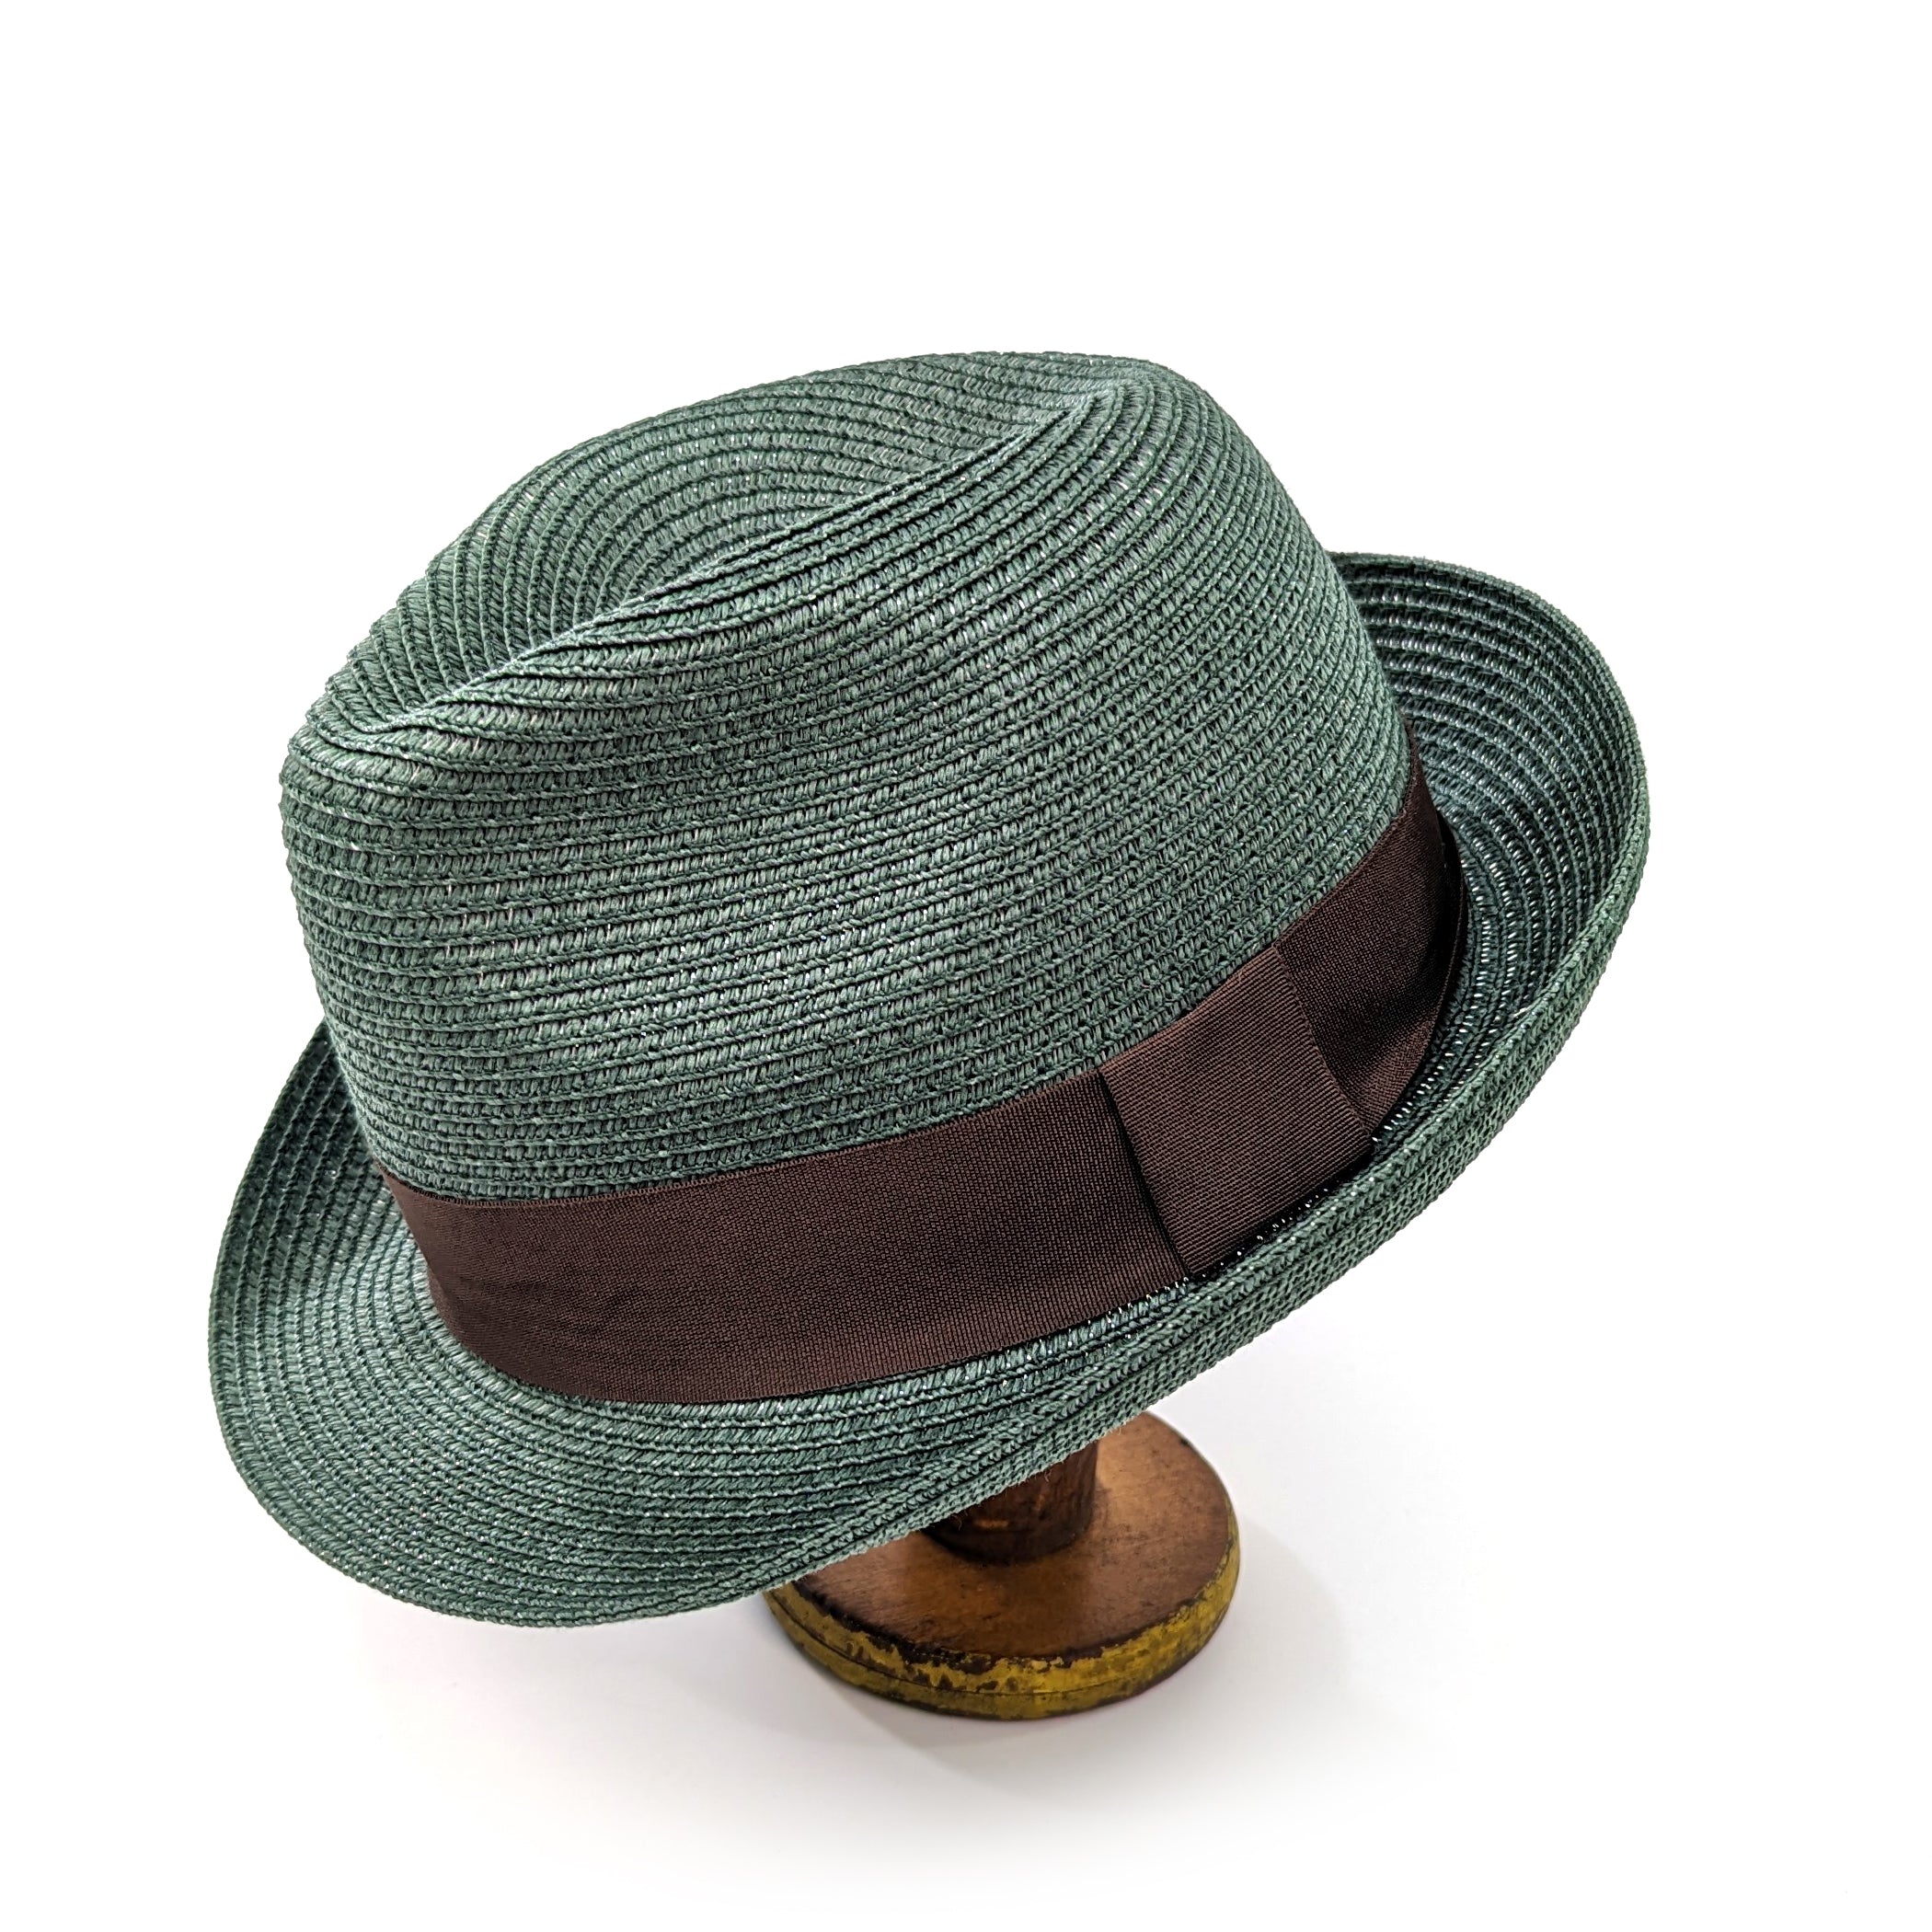 Folding Trilby Style Travel Sun Hat - Teal Green (57cm)